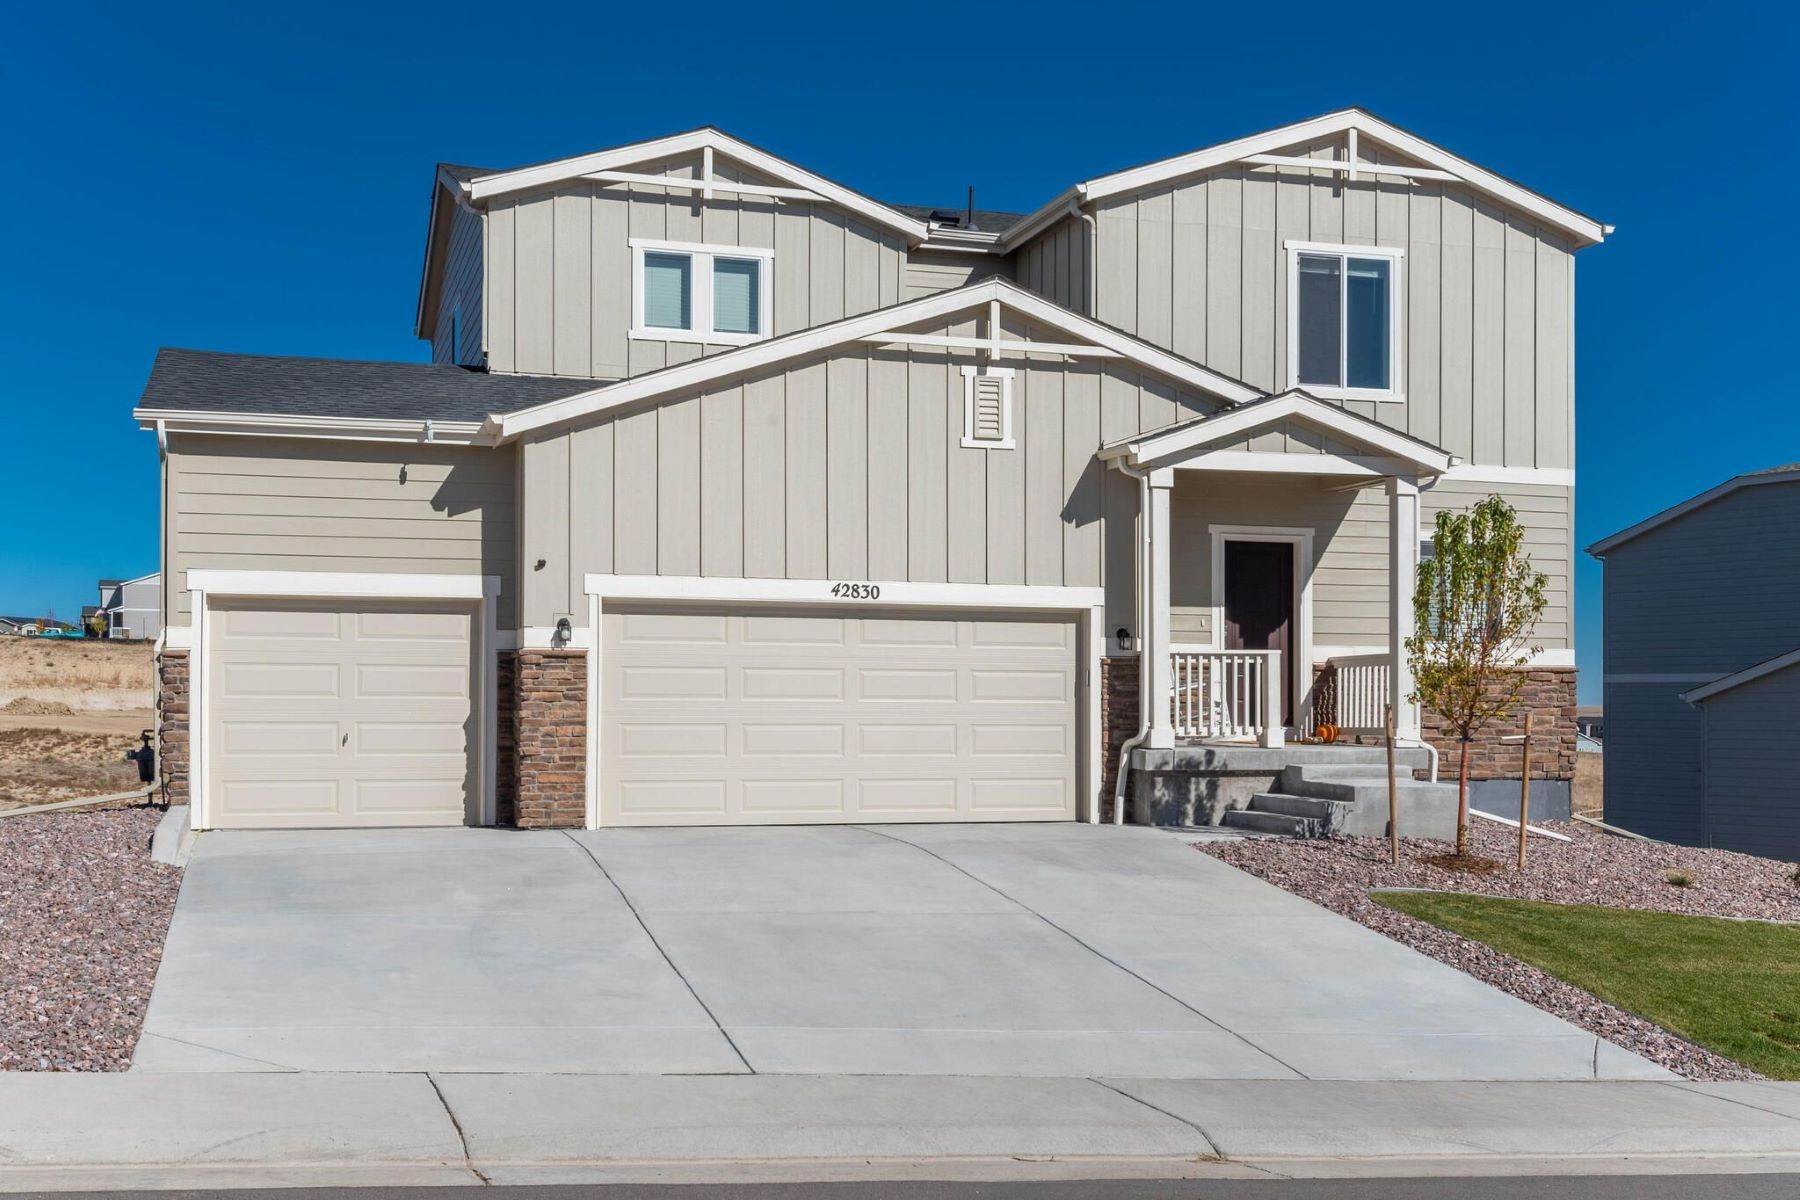 Single Family Homes for Active at Move-In Ready 42830 Ivydel Street Elizabeth, Colorado 80107 United States